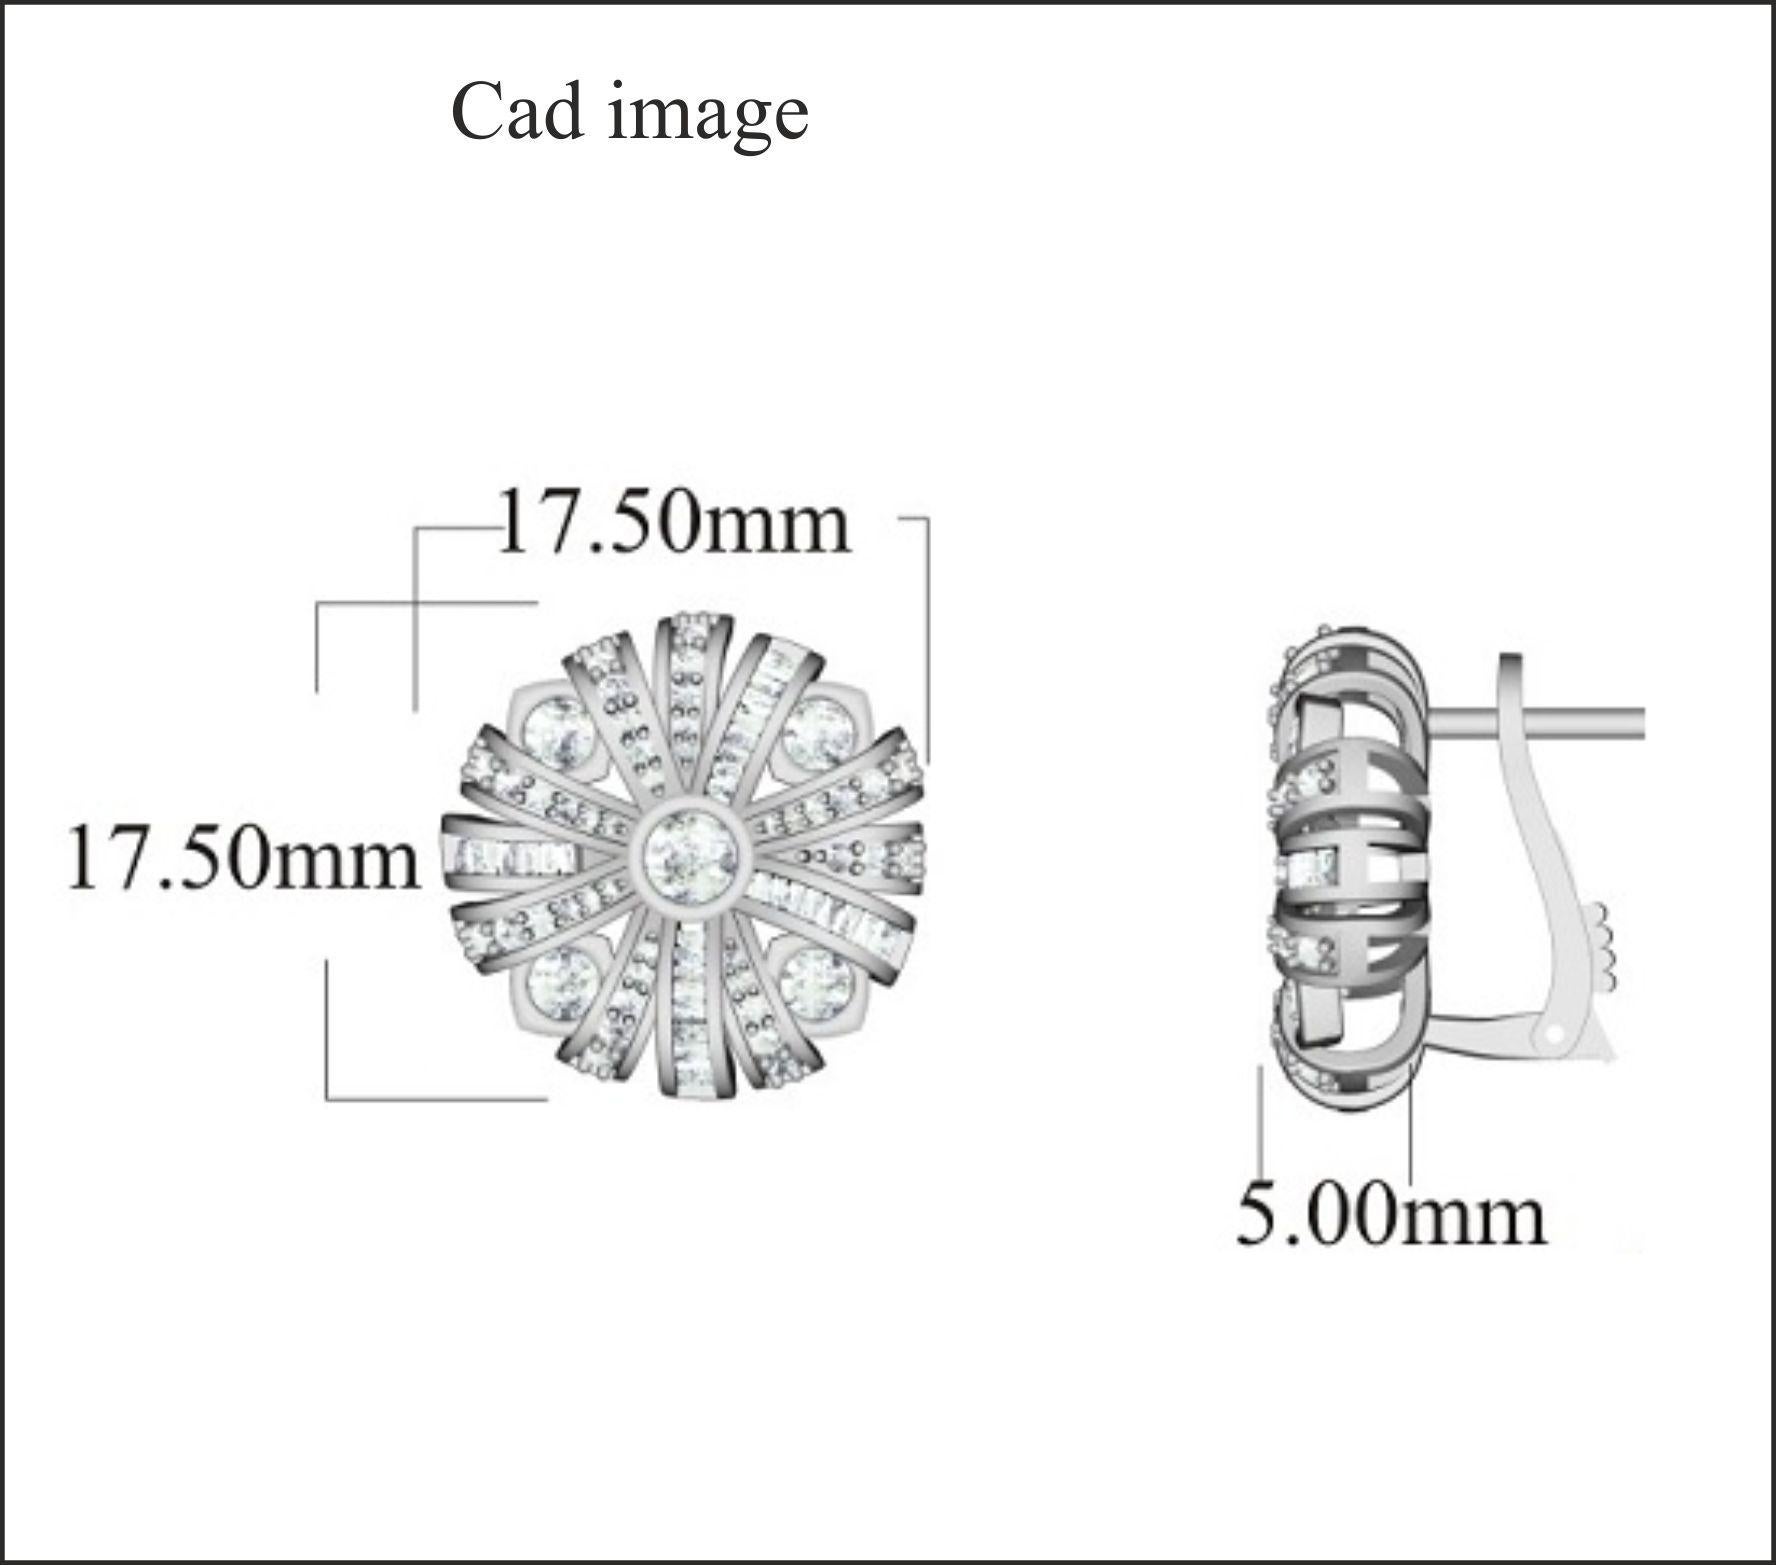 These exquisite design diamond floral stud earrings offer beauty equaled only to her own. These earrings feature 92 round and 68 baguette diamond set in pave, bezel and channel setting and fashioned in 14 Karat White Gold. These timeless stud